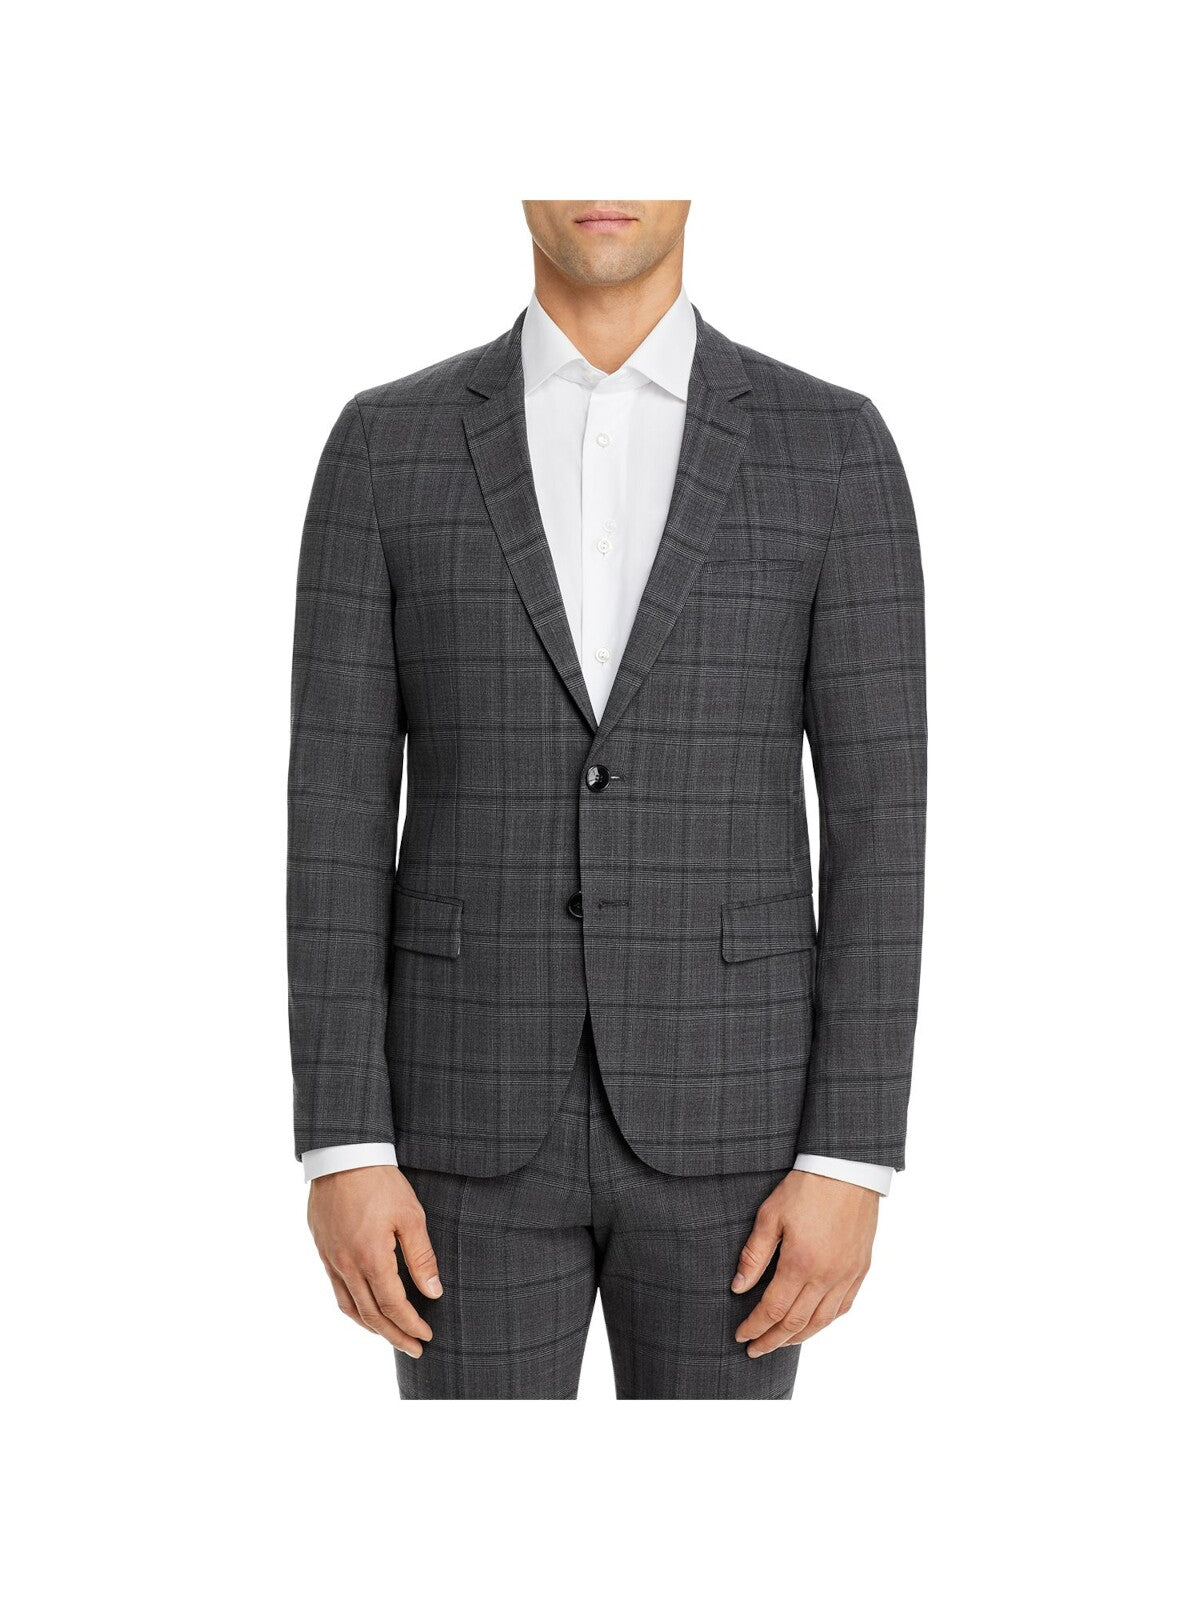 HUGO Mens Boss Red Label Anfred Gray Single Breasted, Windowpane Plaid Suit Jacket 38R